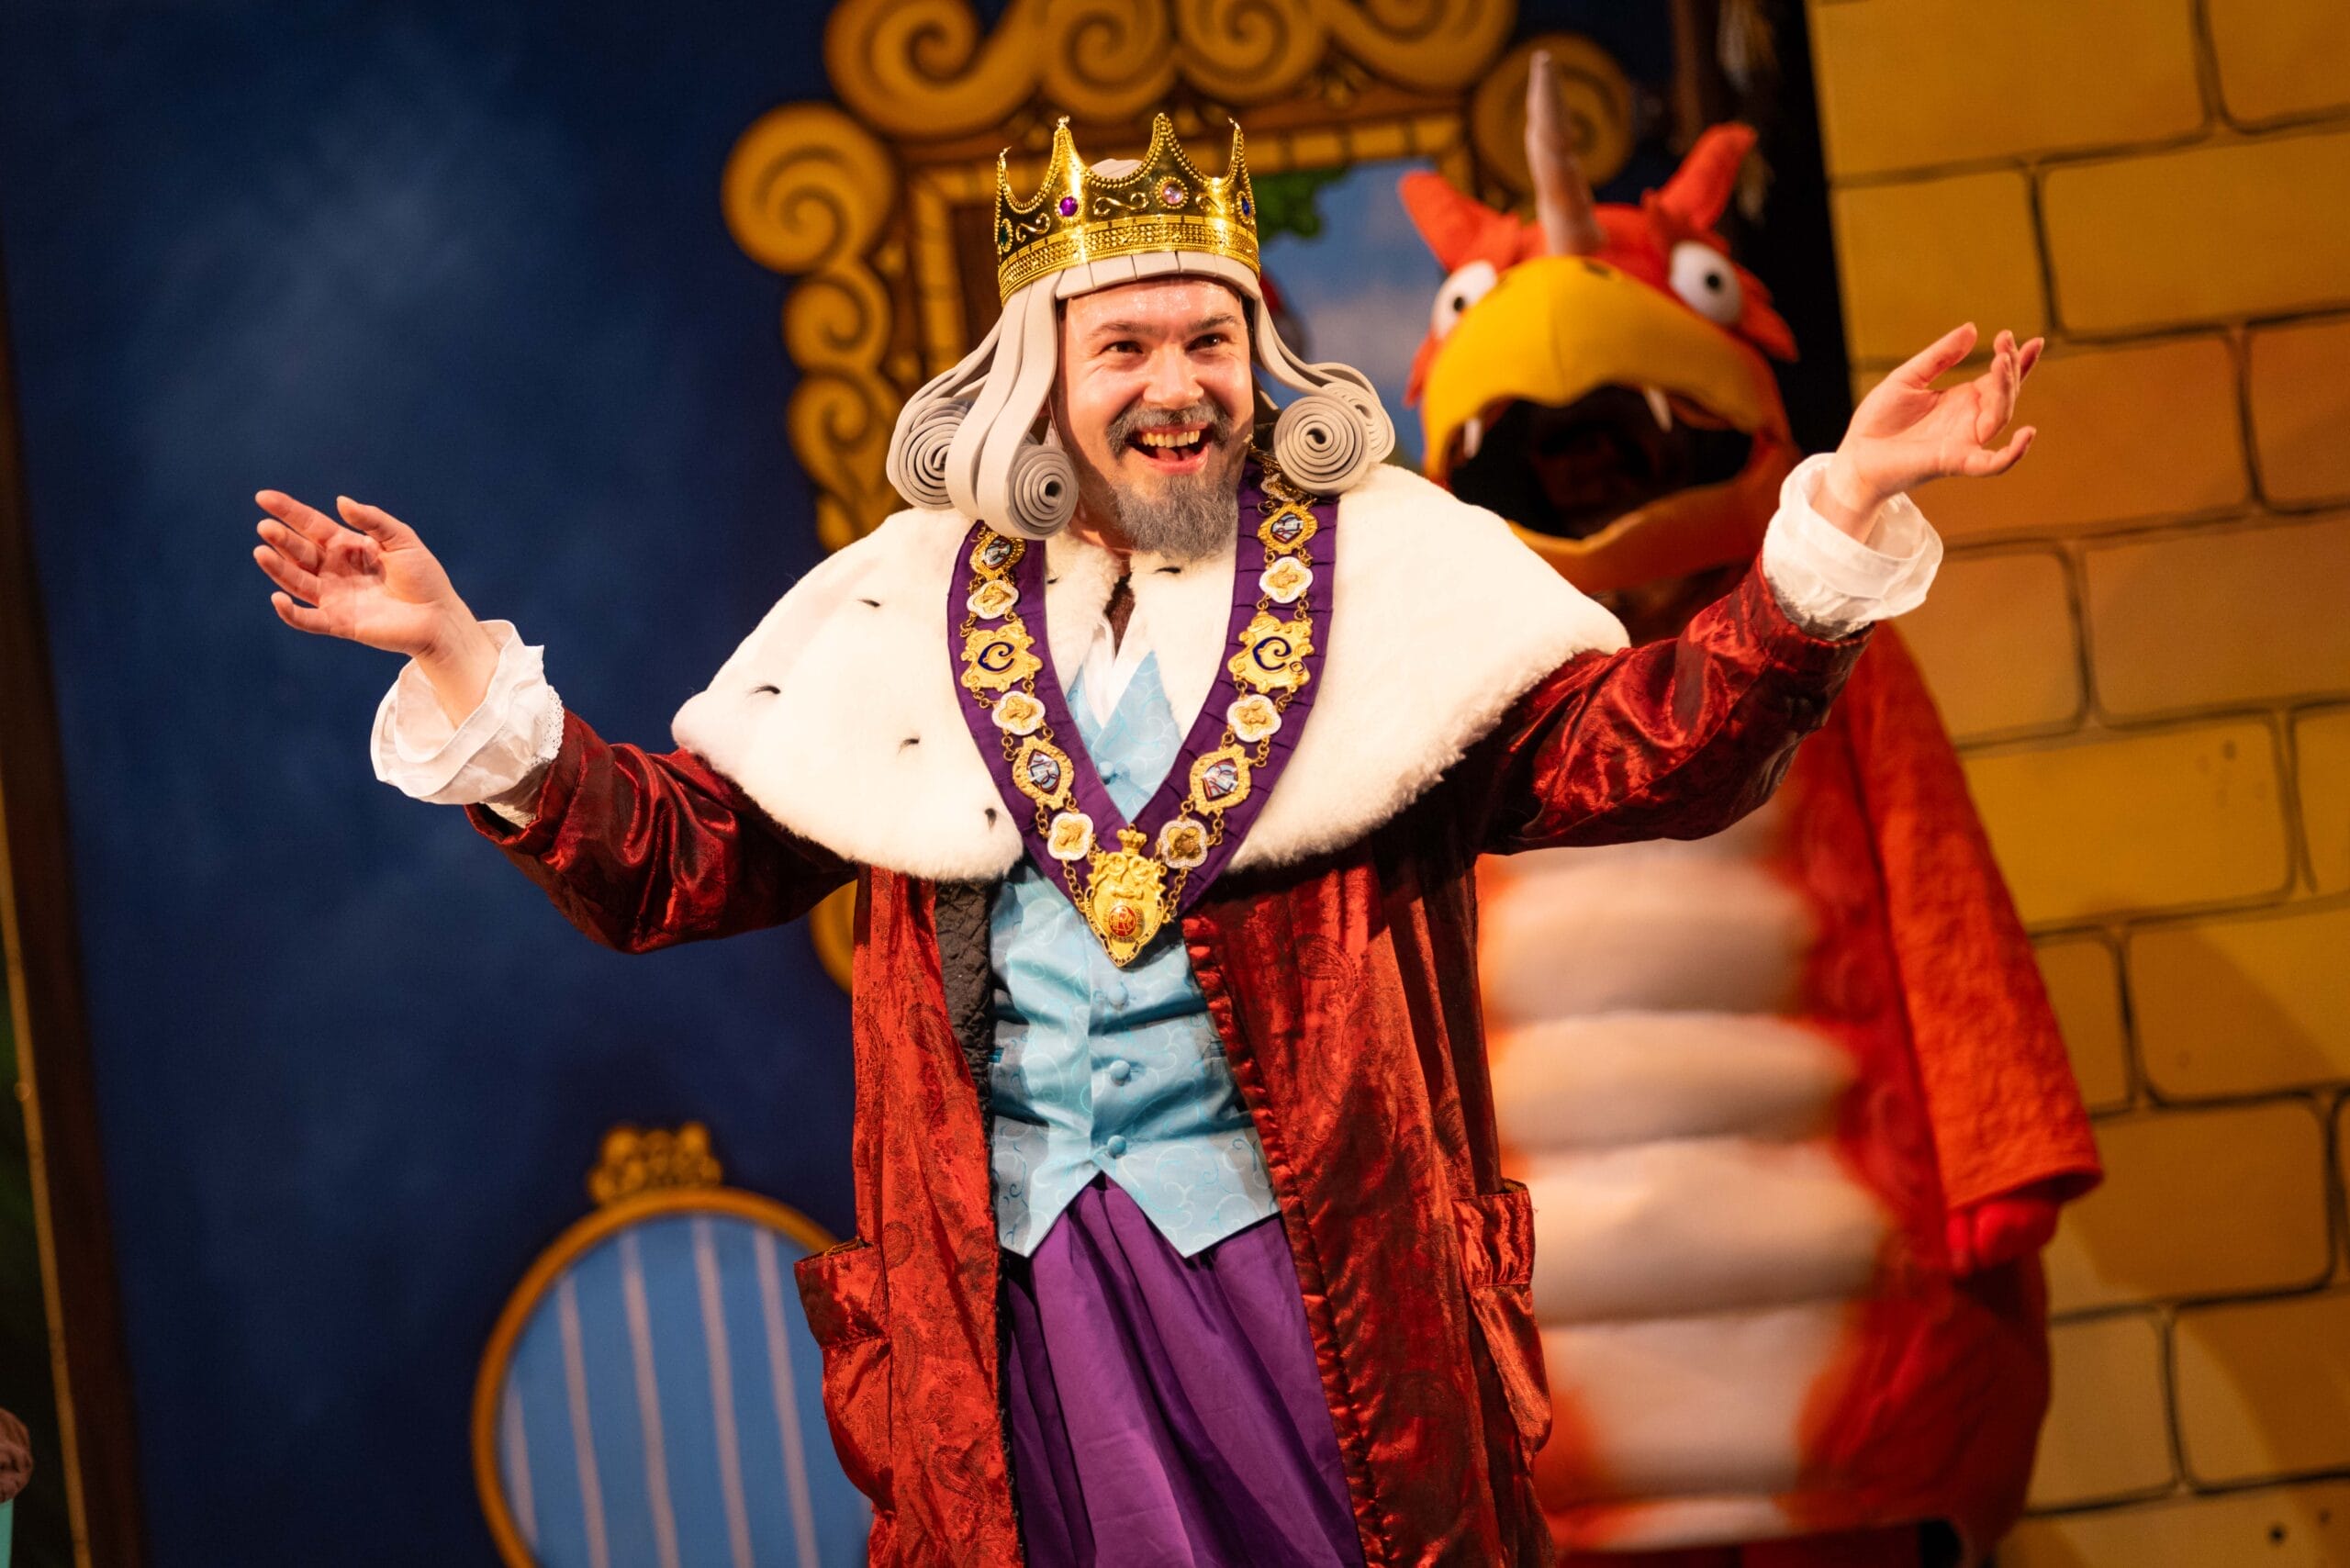 The King, in full regal regalia and with a long grey wig, holds his arms wide. Behind him can be seen Zog the orange dragon.